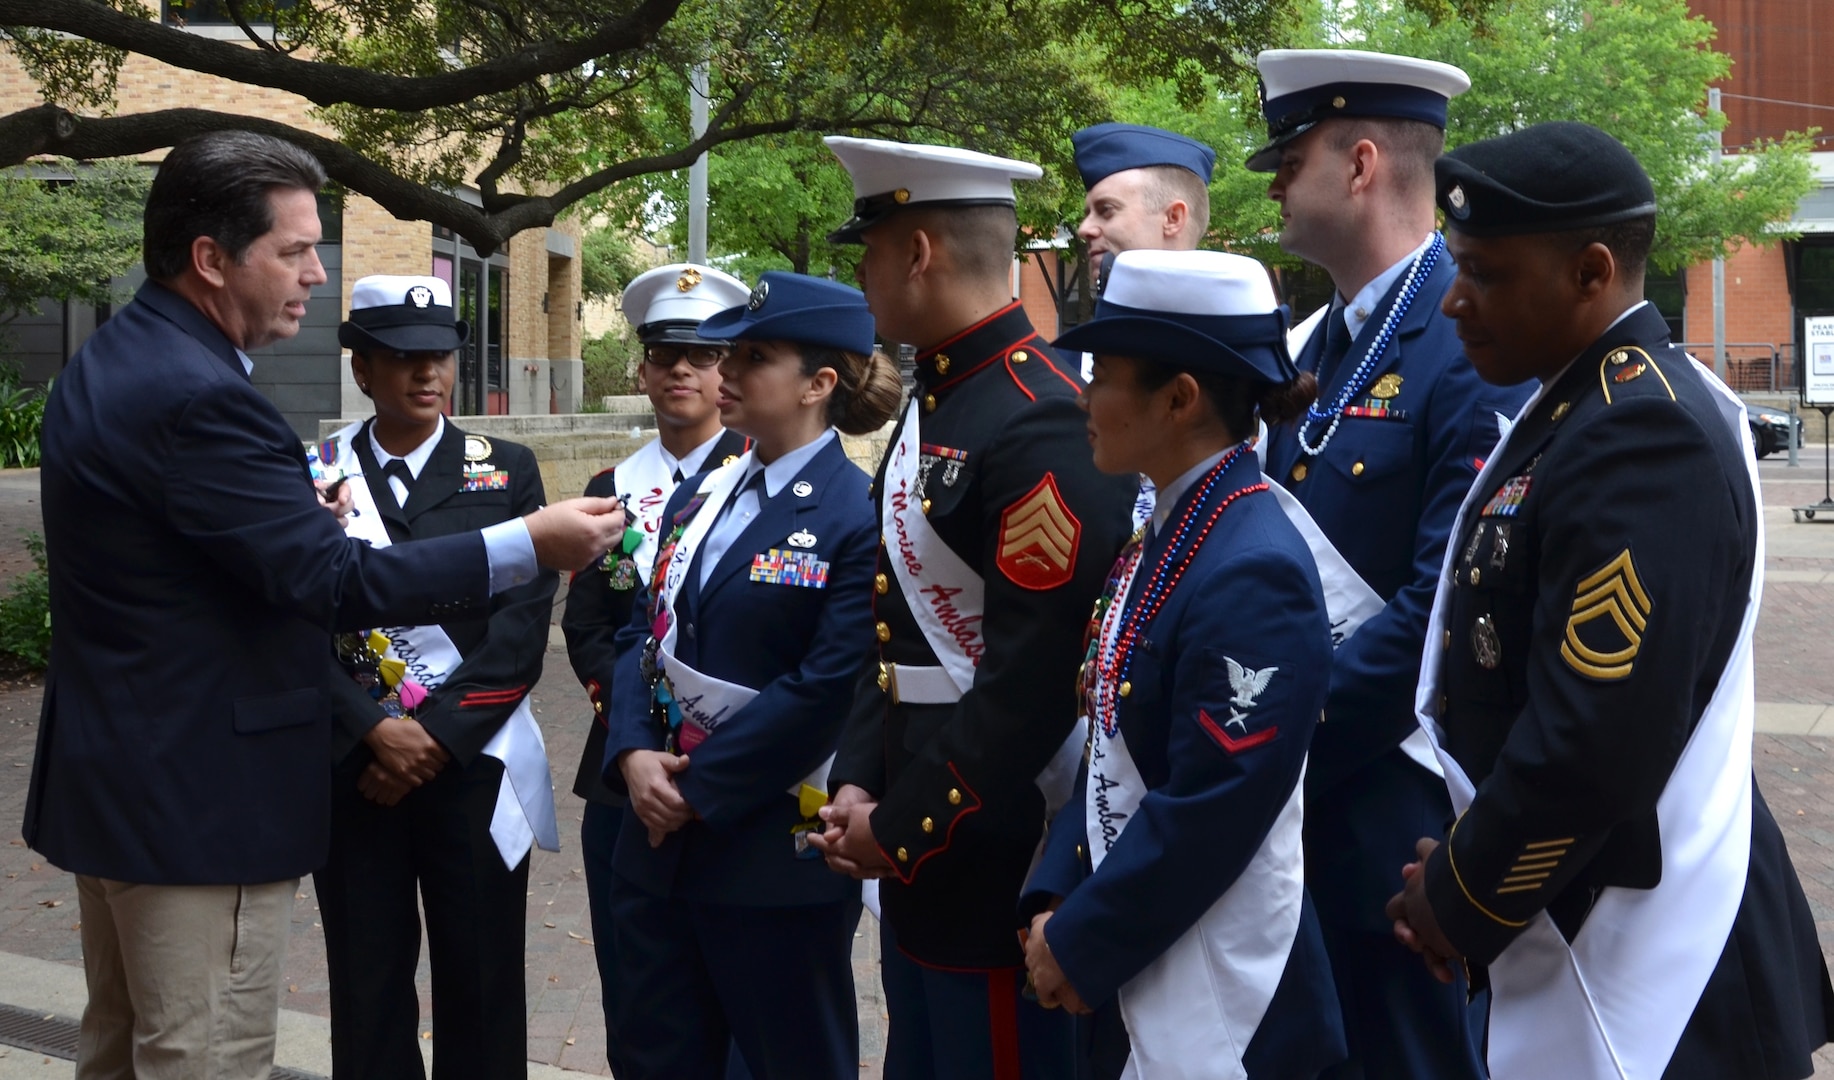 ABC news anchor Steve Spriester of KSAT 12 interviews the 2019 Joint Base San Antonio Military Ambassadors during Fiesta San Antonio media day March 27 at the Pearl Stable
in San Antonio. The 128th Fiesta San Antonio takes place April 18-28 and includes more than 100 events that showcase San Antonio's rich multicultural heritage. Fiesta began in 1891 to honor the heroes of the Battles of the Alamo and San Jacinto. Two service members representing each military service serve as military ambassadors and take part in more than 50 Fiesta events.